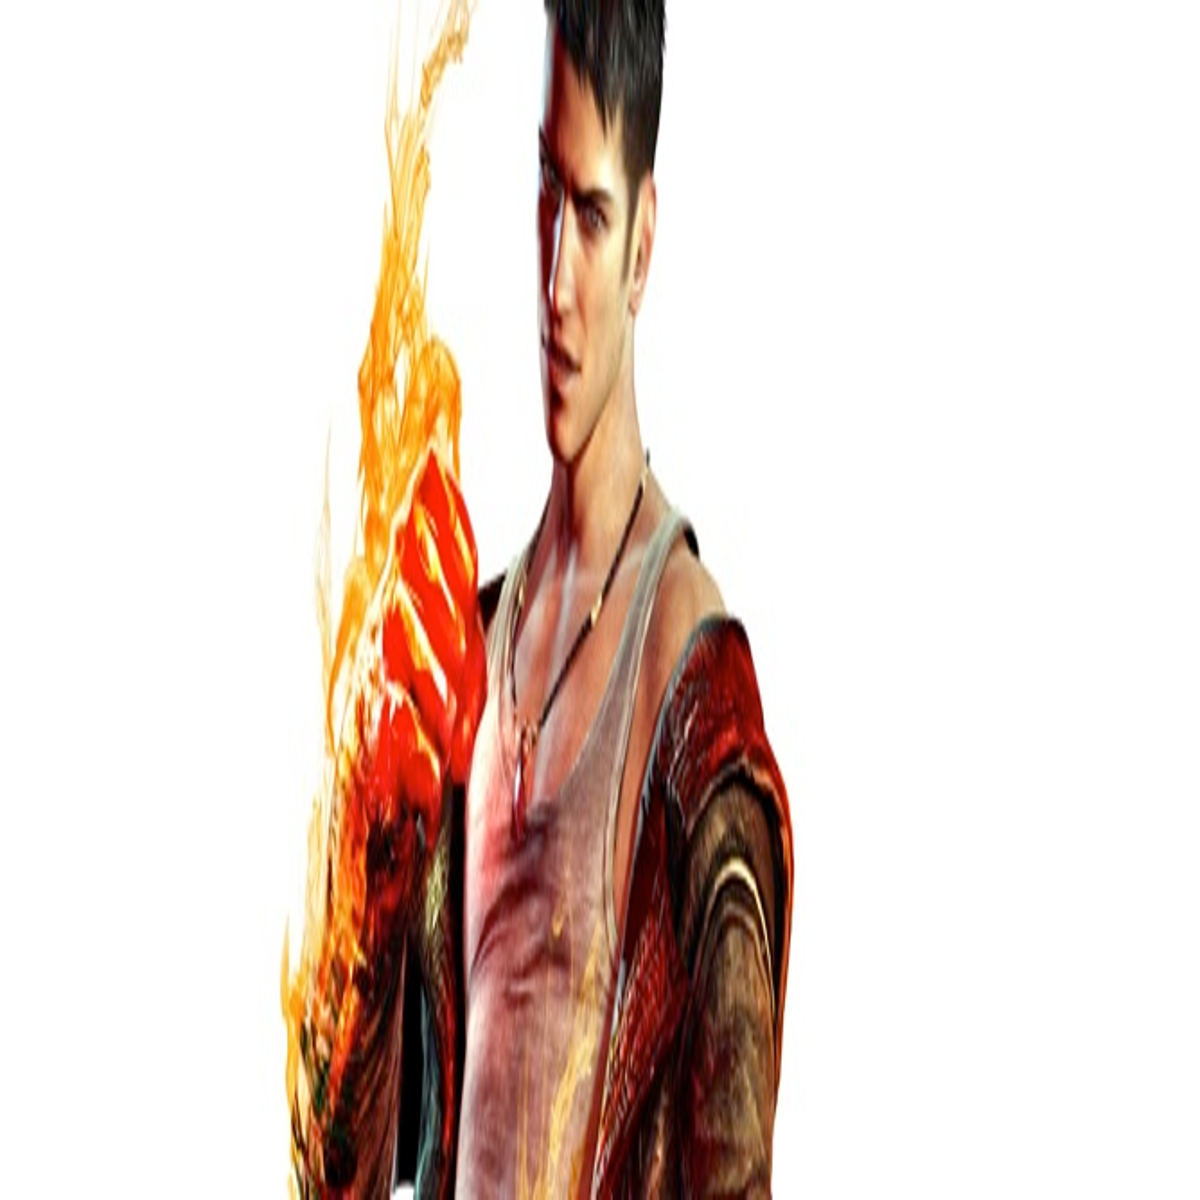 Buy DmC: Devil May Cry Complete Pack PC Steam key! Cheap price